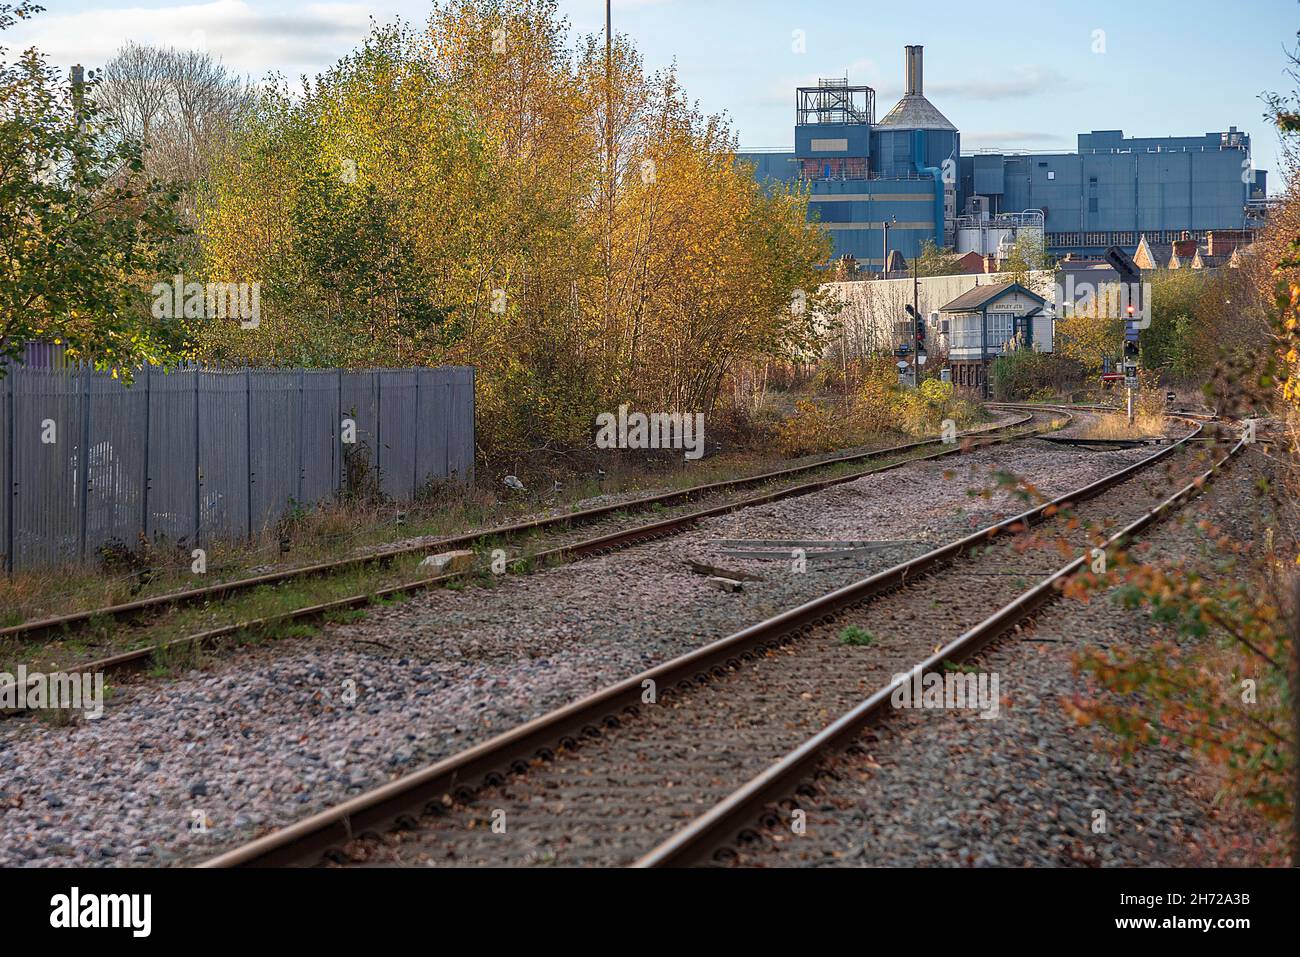 Warrington Bank Quay station, to be redeveloped as part of a new line to Marsden and Leeds through Manchester. Picture shows the low level line, Stock Photo